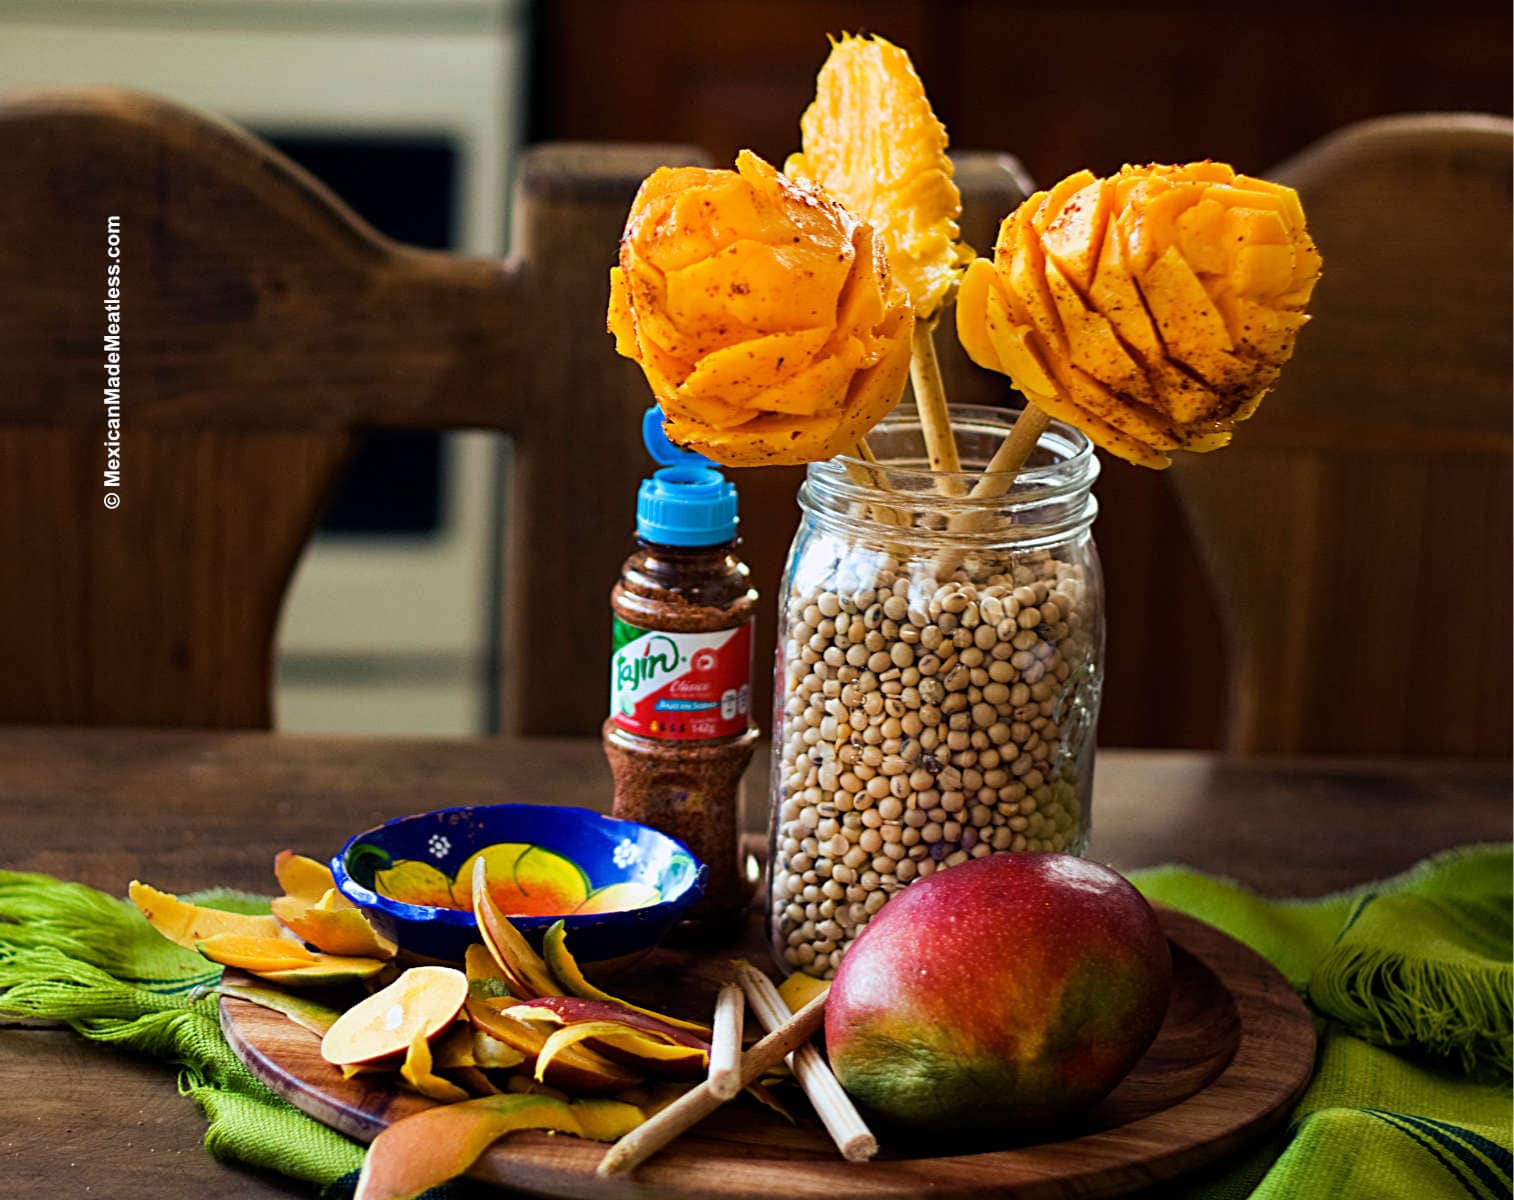 How to Make Mexican Mango on a Stick (Mango Flower)